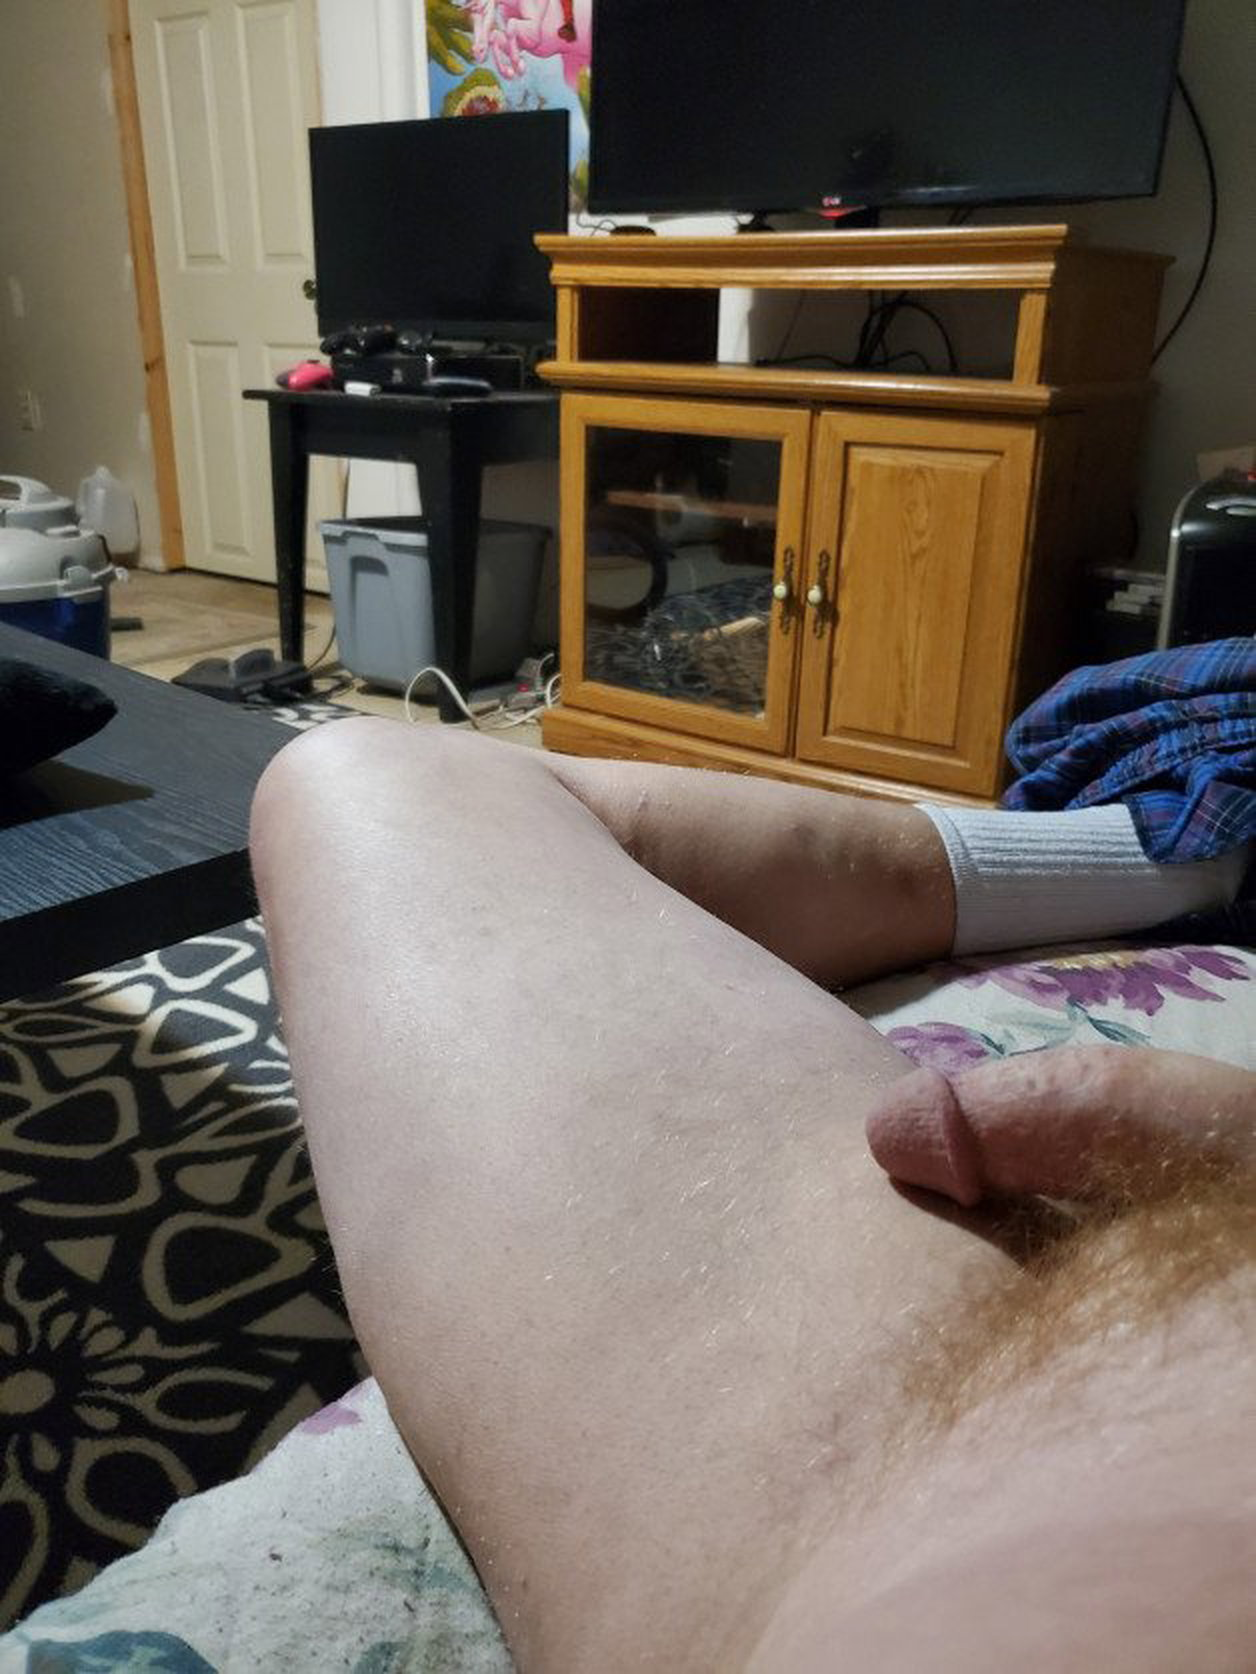 Watch the Photo by jayroth492 with the username @jayroth492, posted on February 16, 2021. The post is about the topic Mature. and the text says 'I'm so horny tonight, can anyone help me'